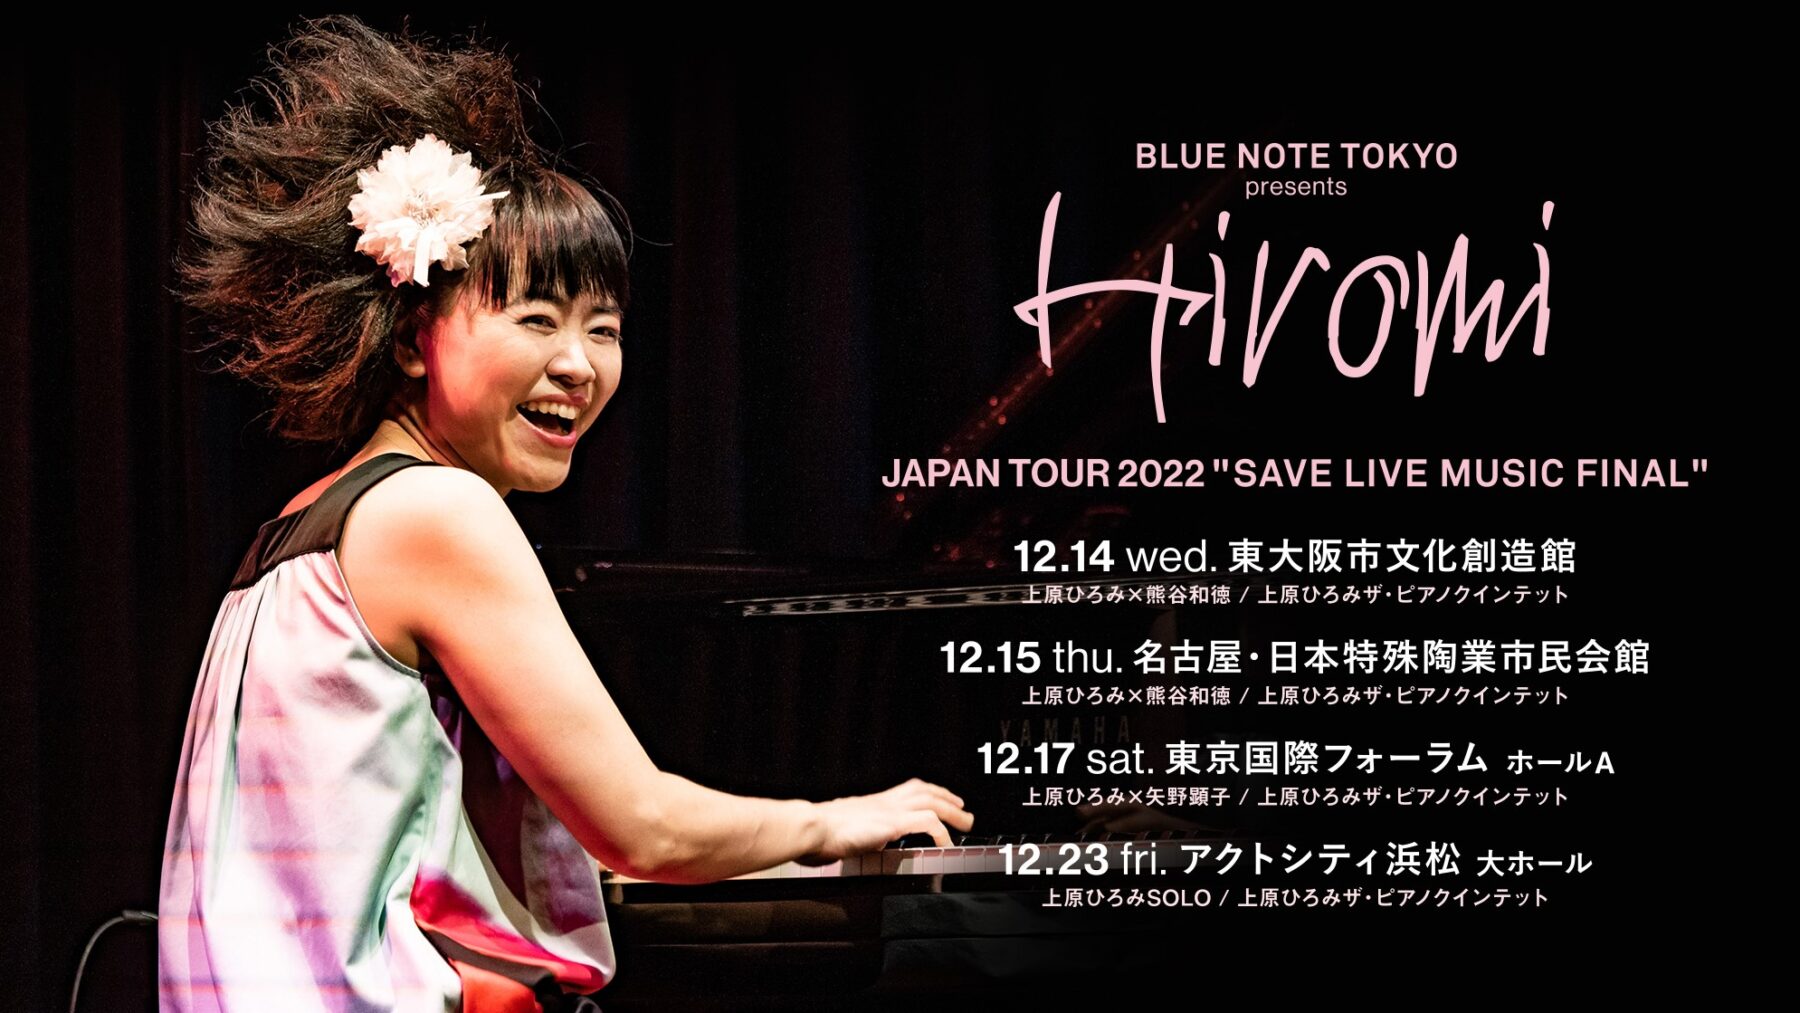 BLUE NOTE TOKYO presents  上原ひろみJAPAN TOUR 2022 “SAVE LIVE MUSIC FINAL”